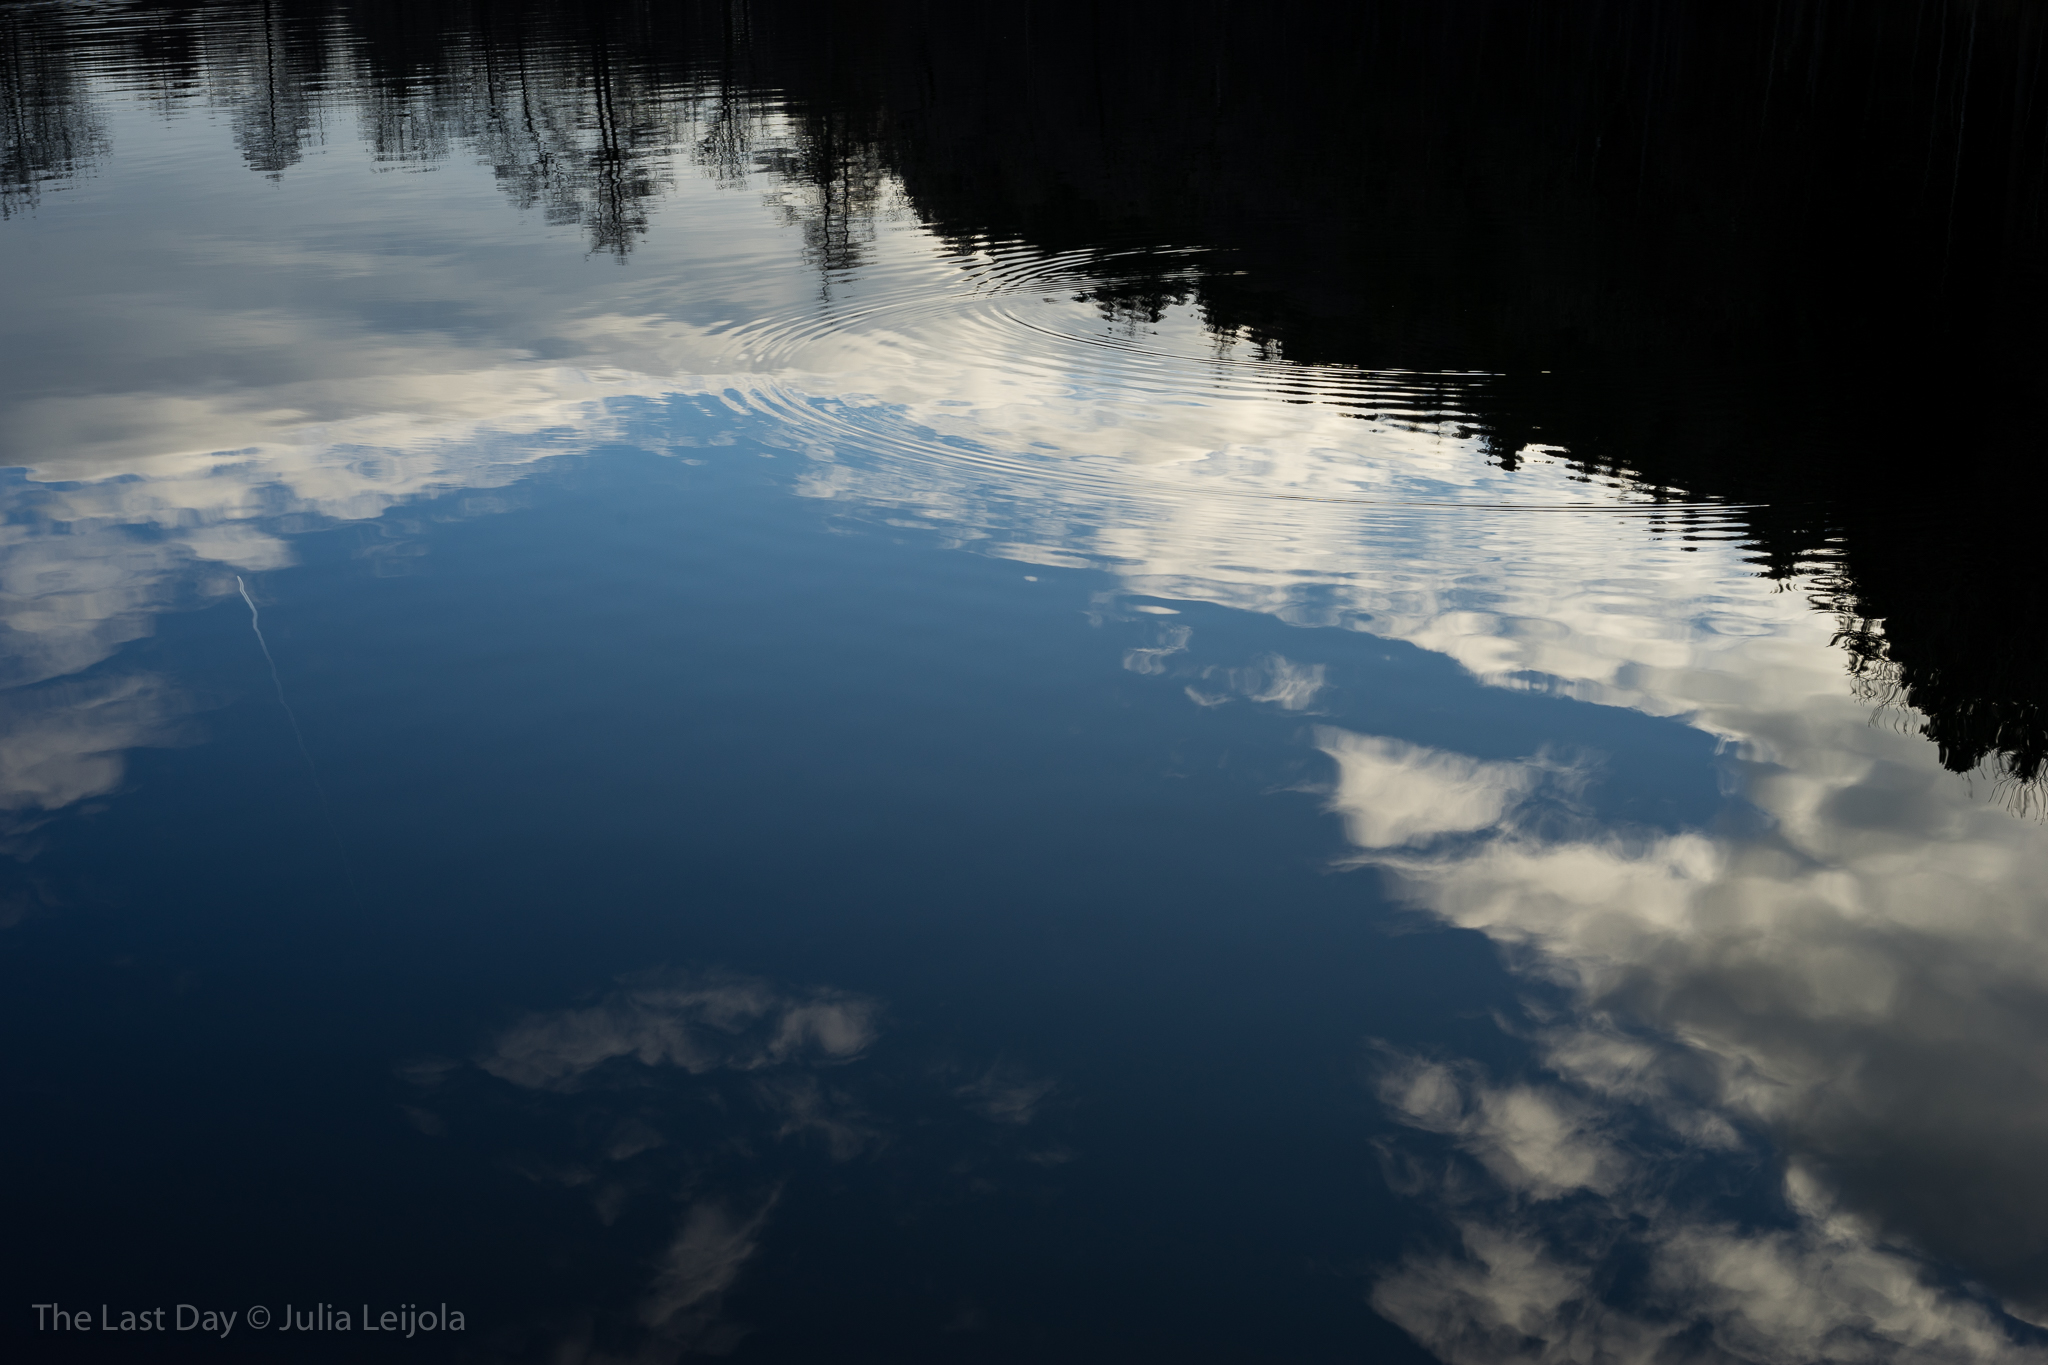 A reflection of a morning sky and the surrounding forest on a lake.